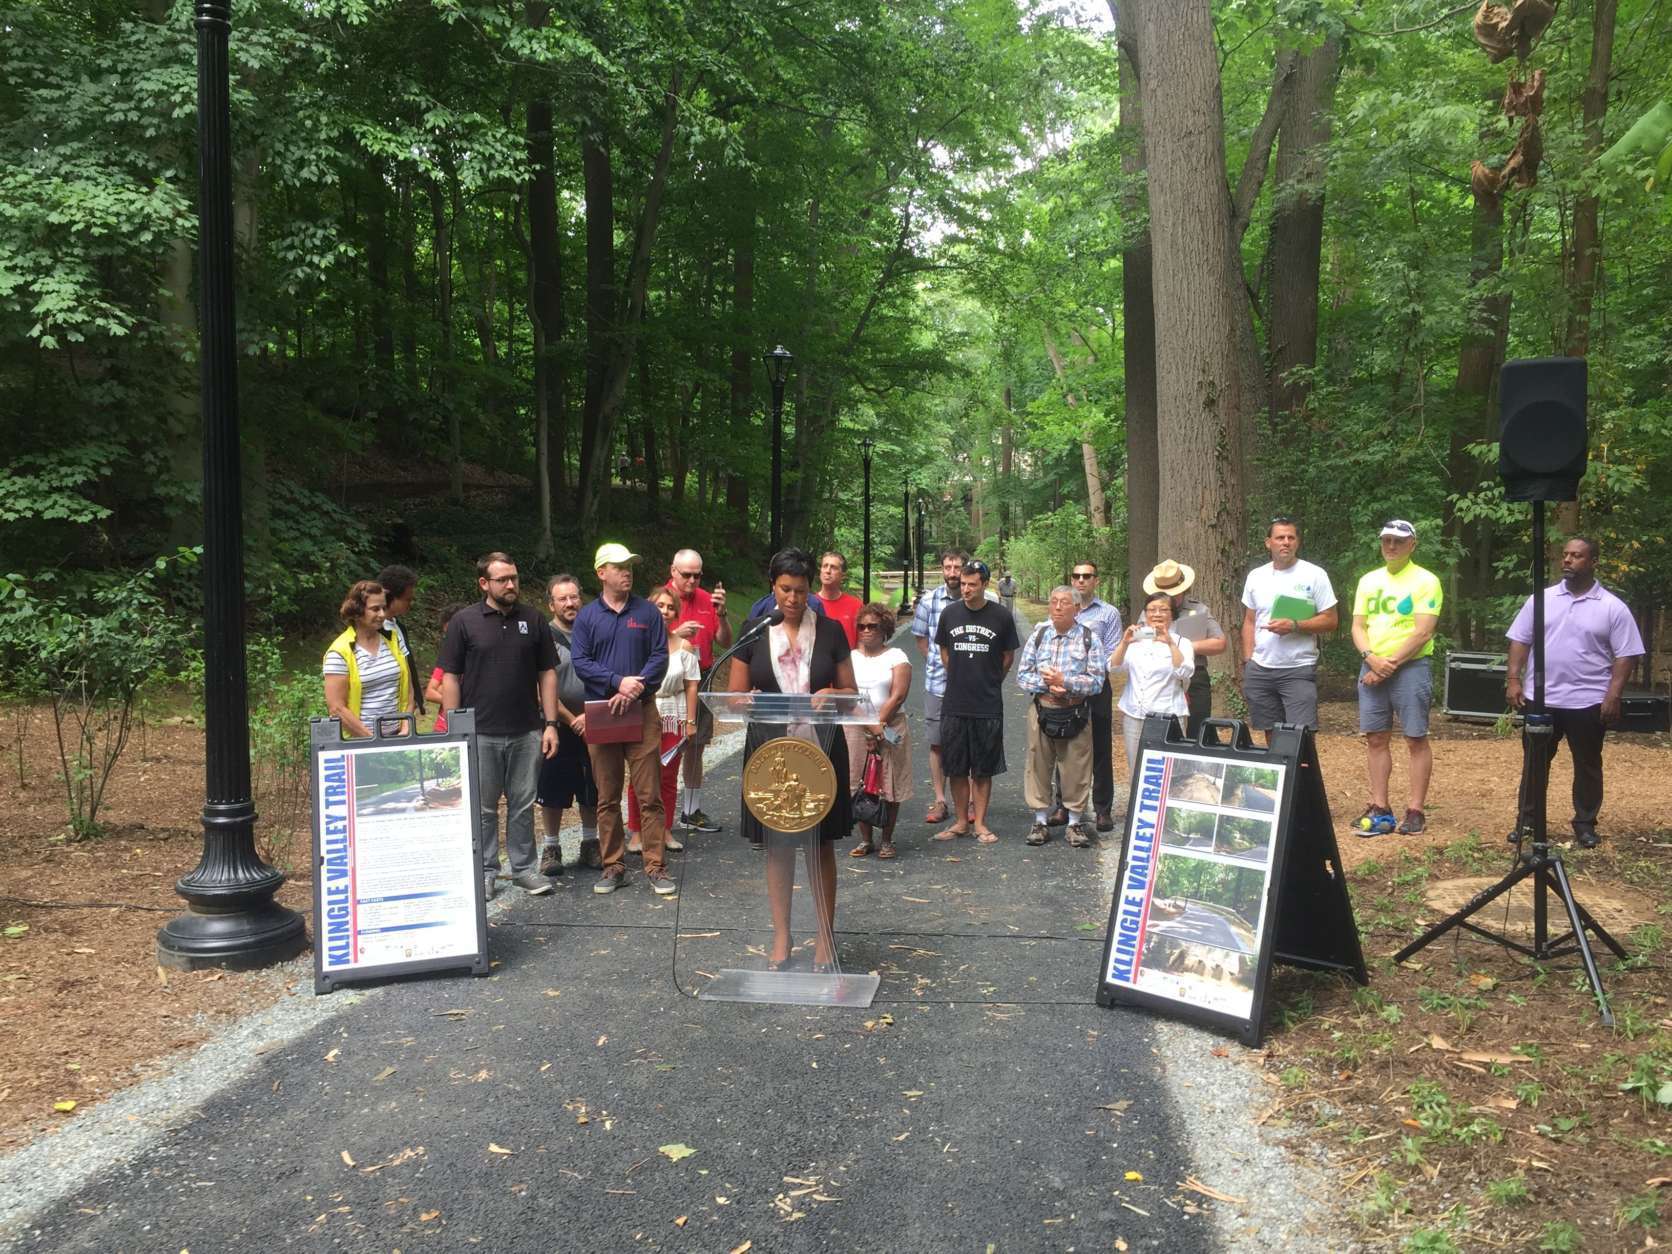 D.C. Mayor Muriel Bowser addresses a crowd during a ribbon-cutting ceremony for Klingle Valley Trail on Saturday, June 24, 2017. (WTOP/Mike Murillo)